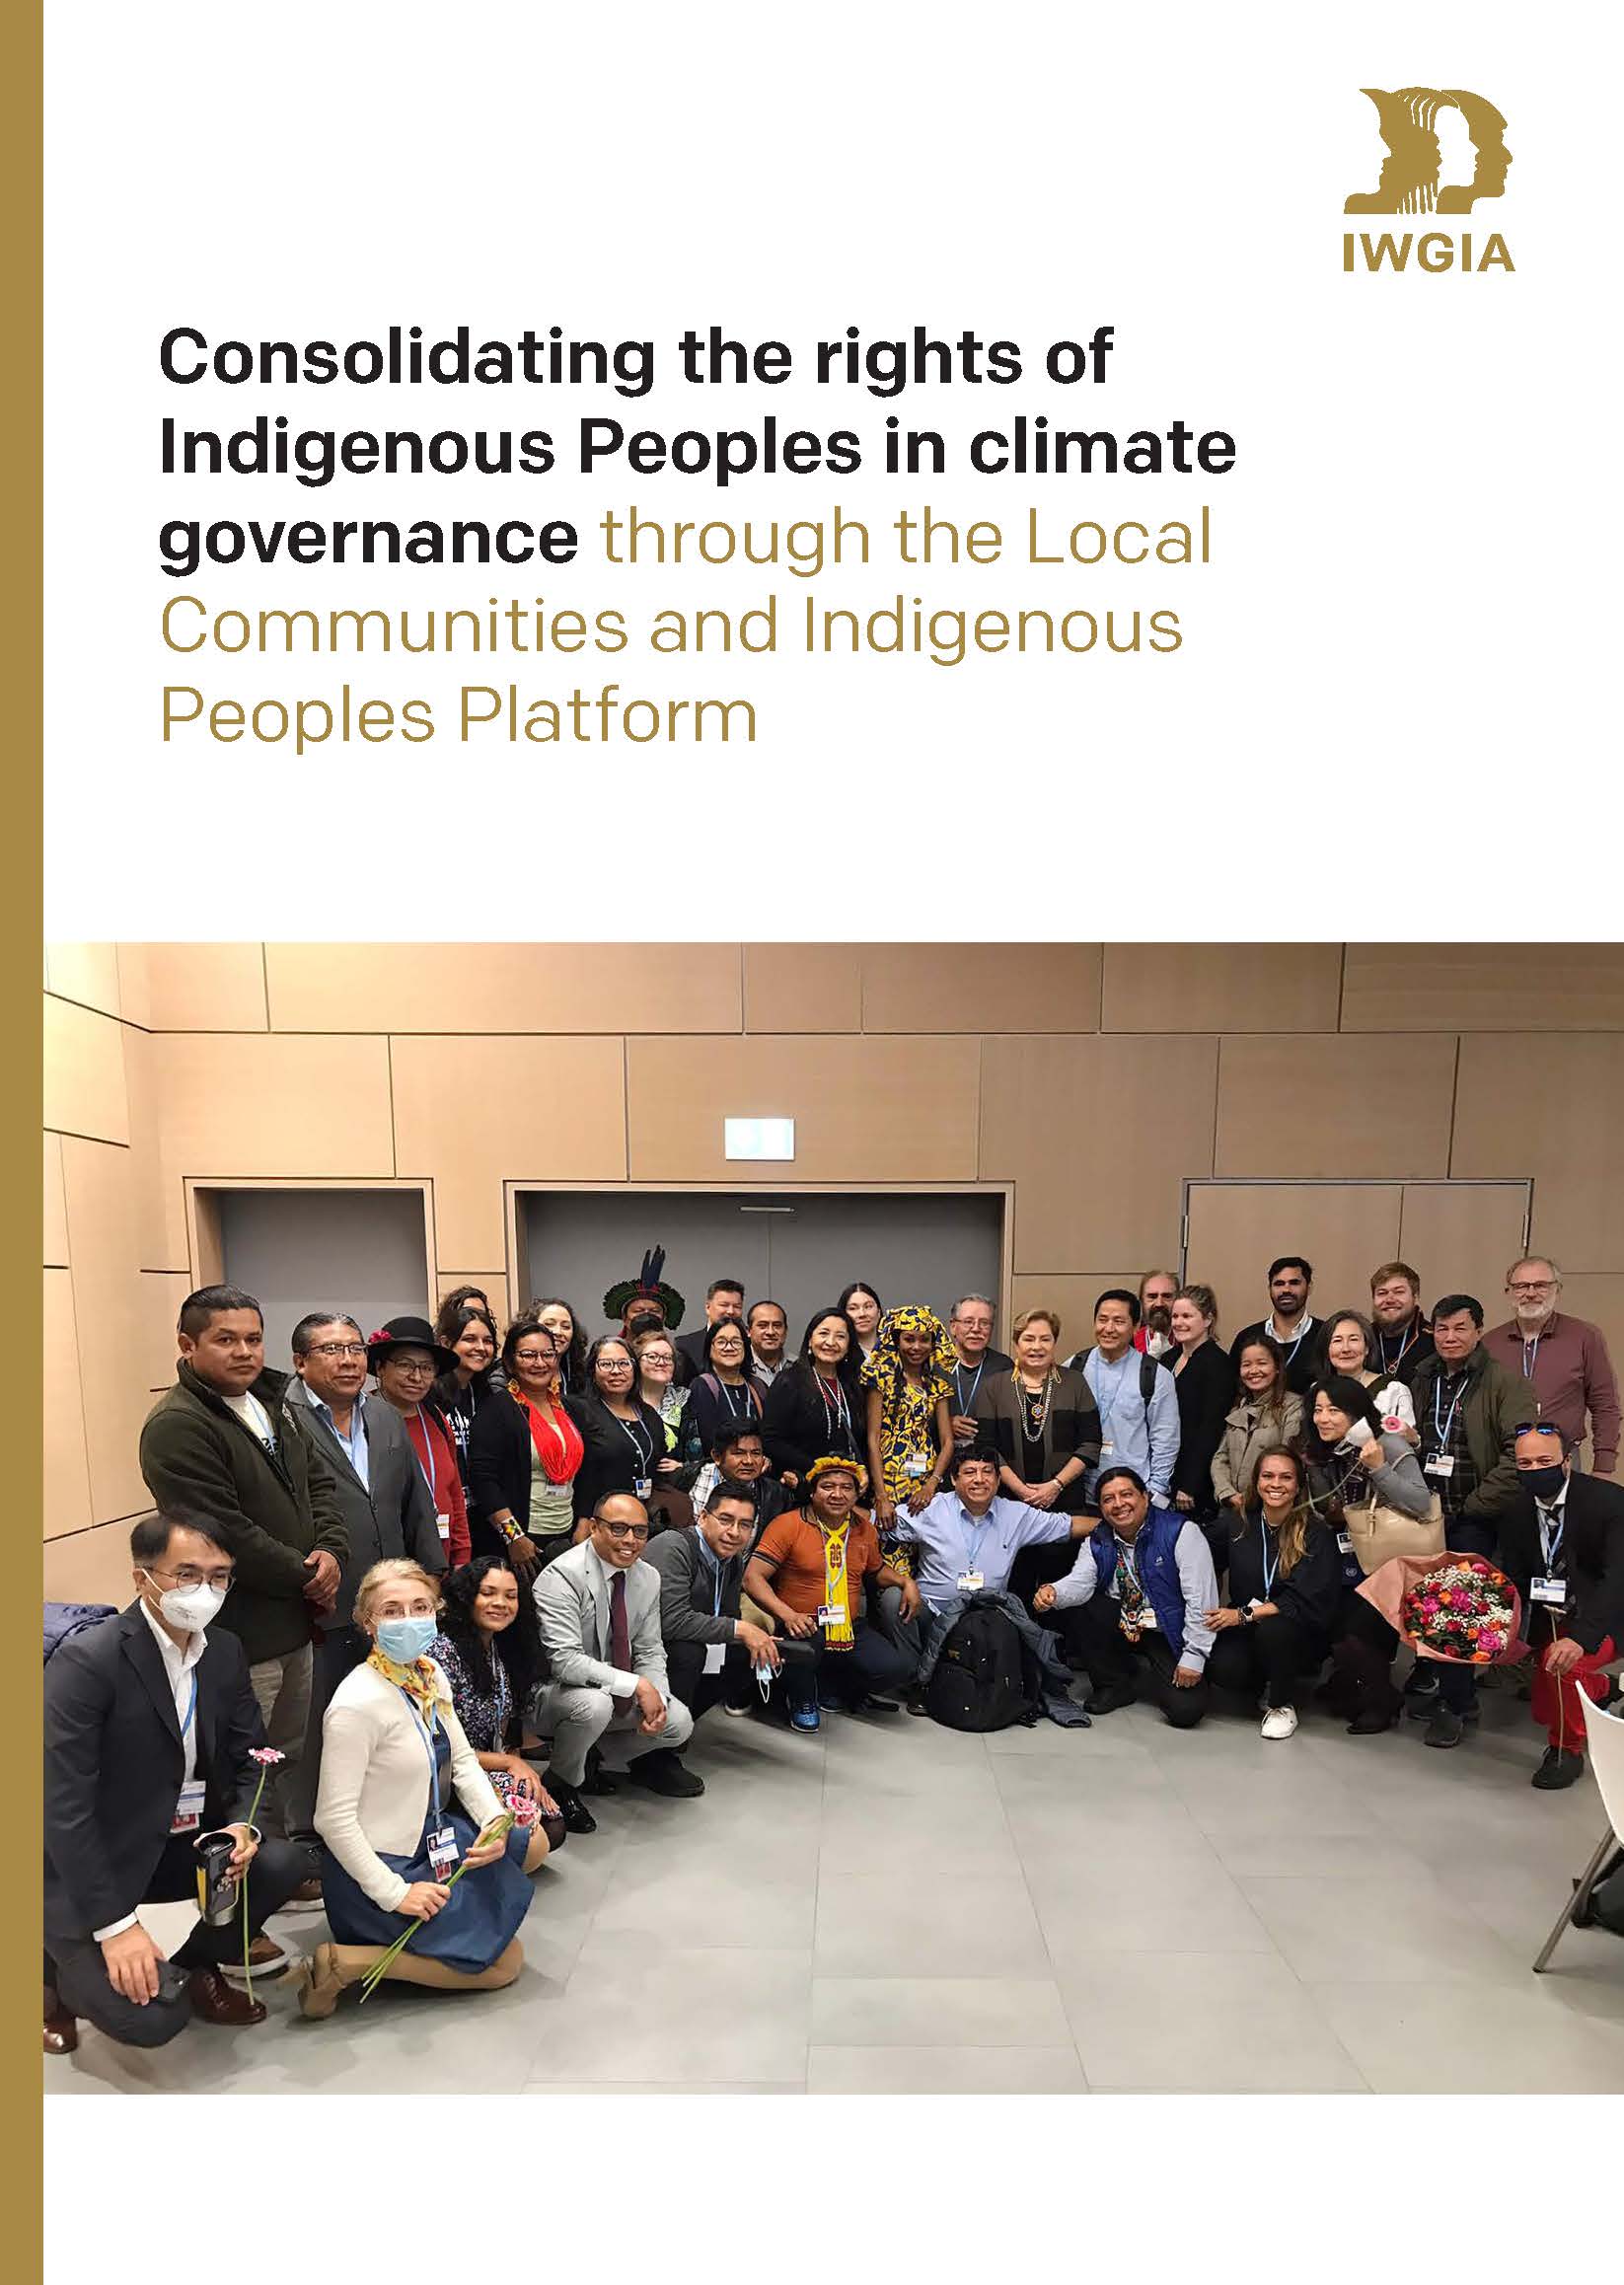 Consolidating the rights of Indigenous Peoples in climate governance through the Local Communities and Indigenous Peoples Platform